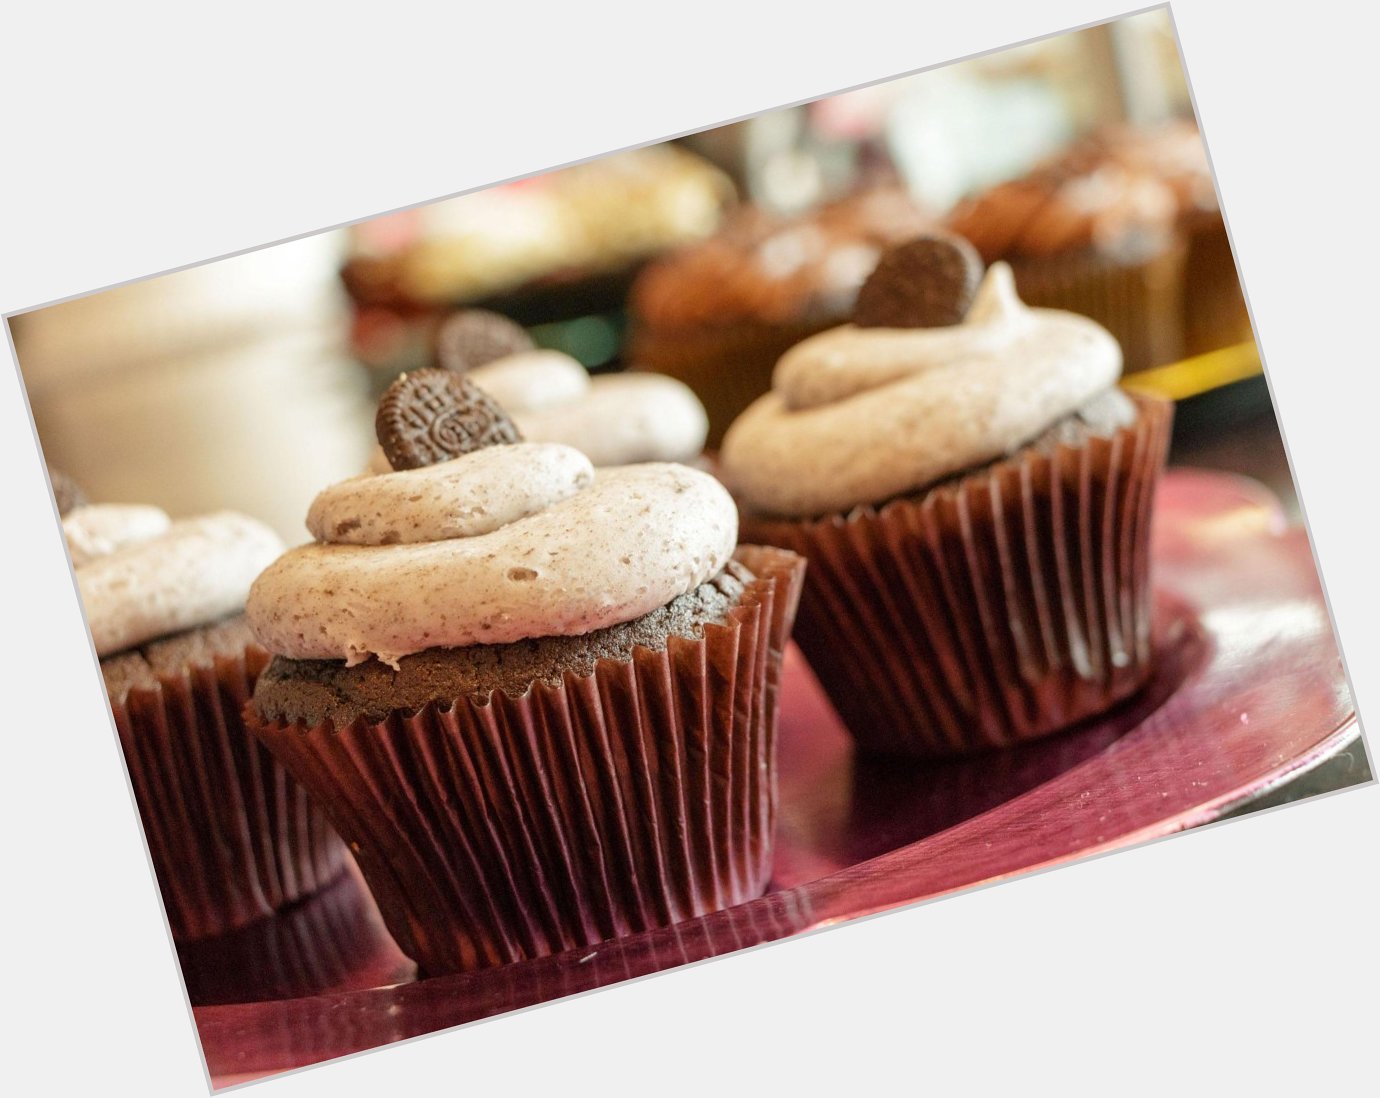  Happy Birthday! Come get a cupcake. Print offer & BOGO free at Smallcakes:  